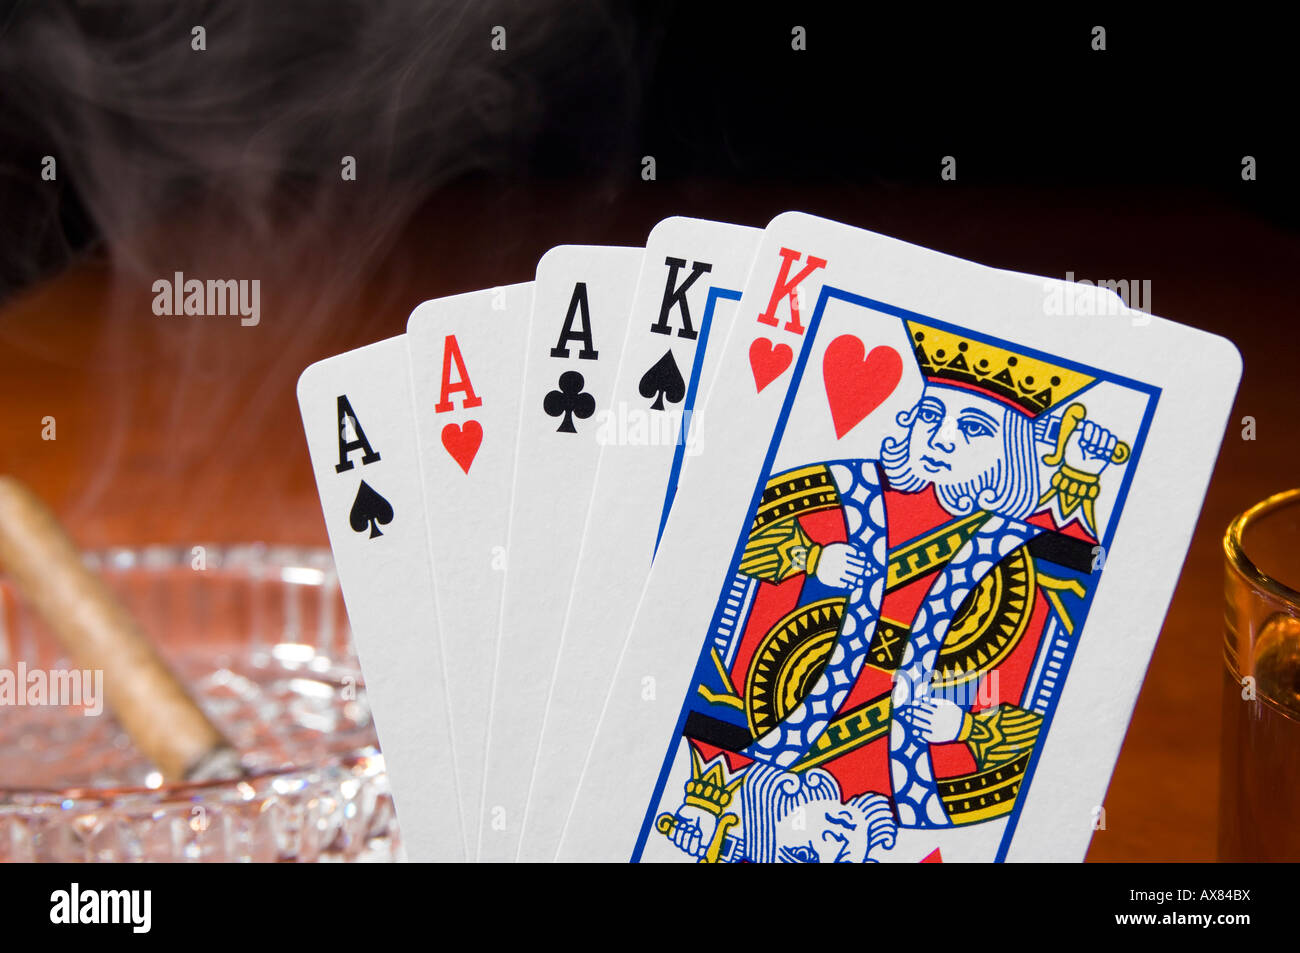 A hand of poker showing aces-high full house with a smoking cigar on the table Stock Photo